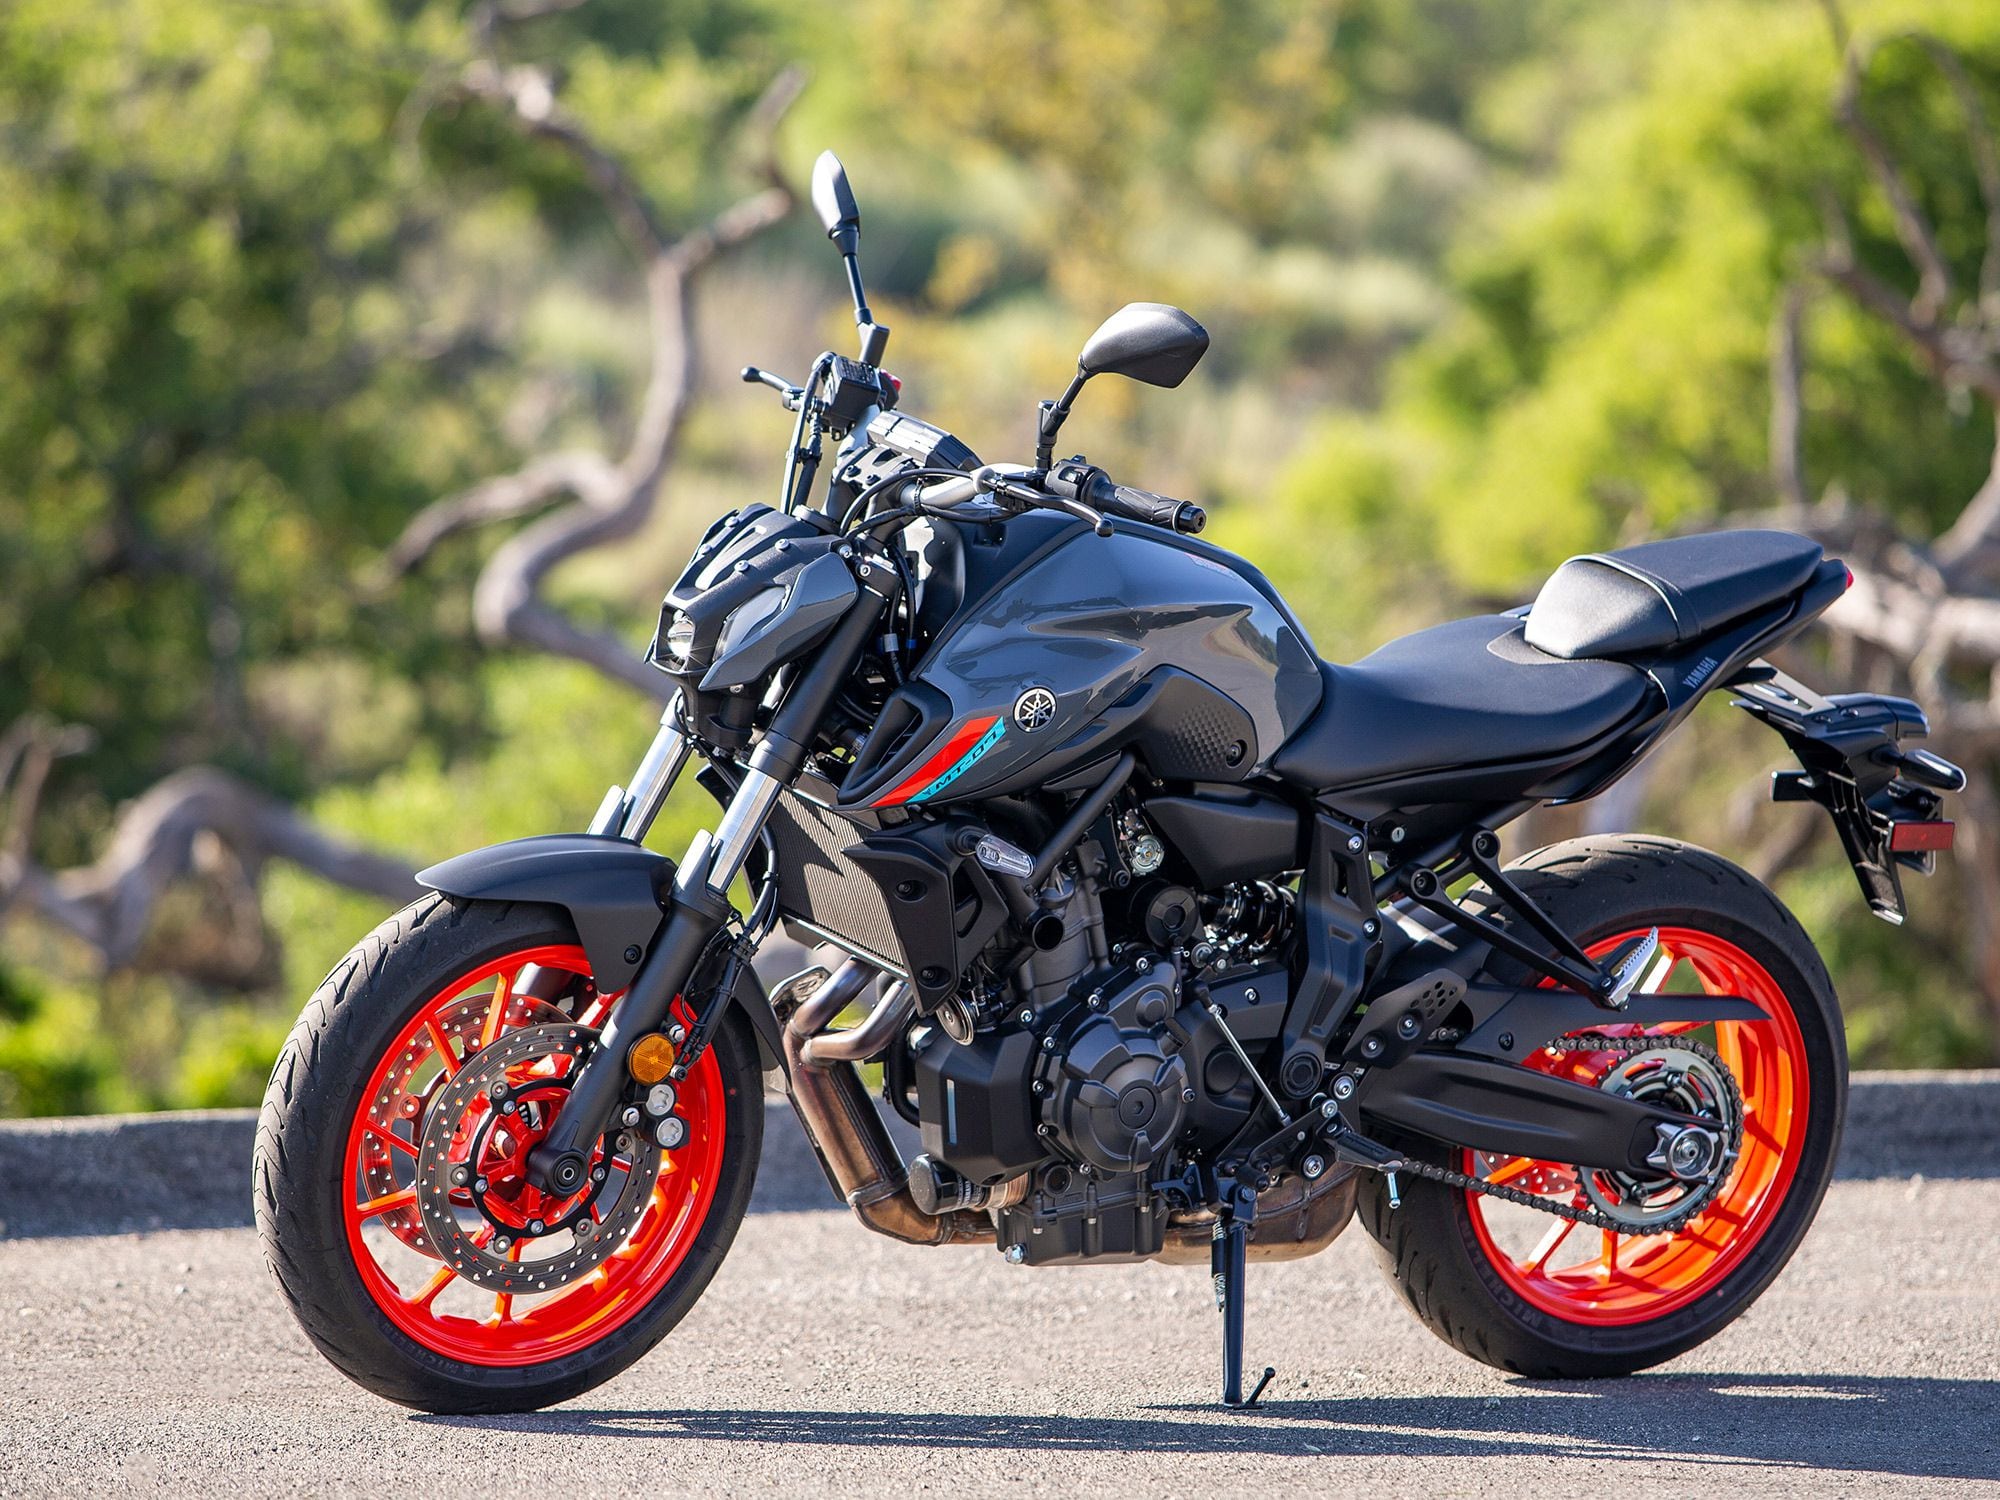 The Yamaha MT-07′s pricing has increased 10 percent in the seven year since it’s introduction. The 2021 MT-07 has a MSRP of $7,699.